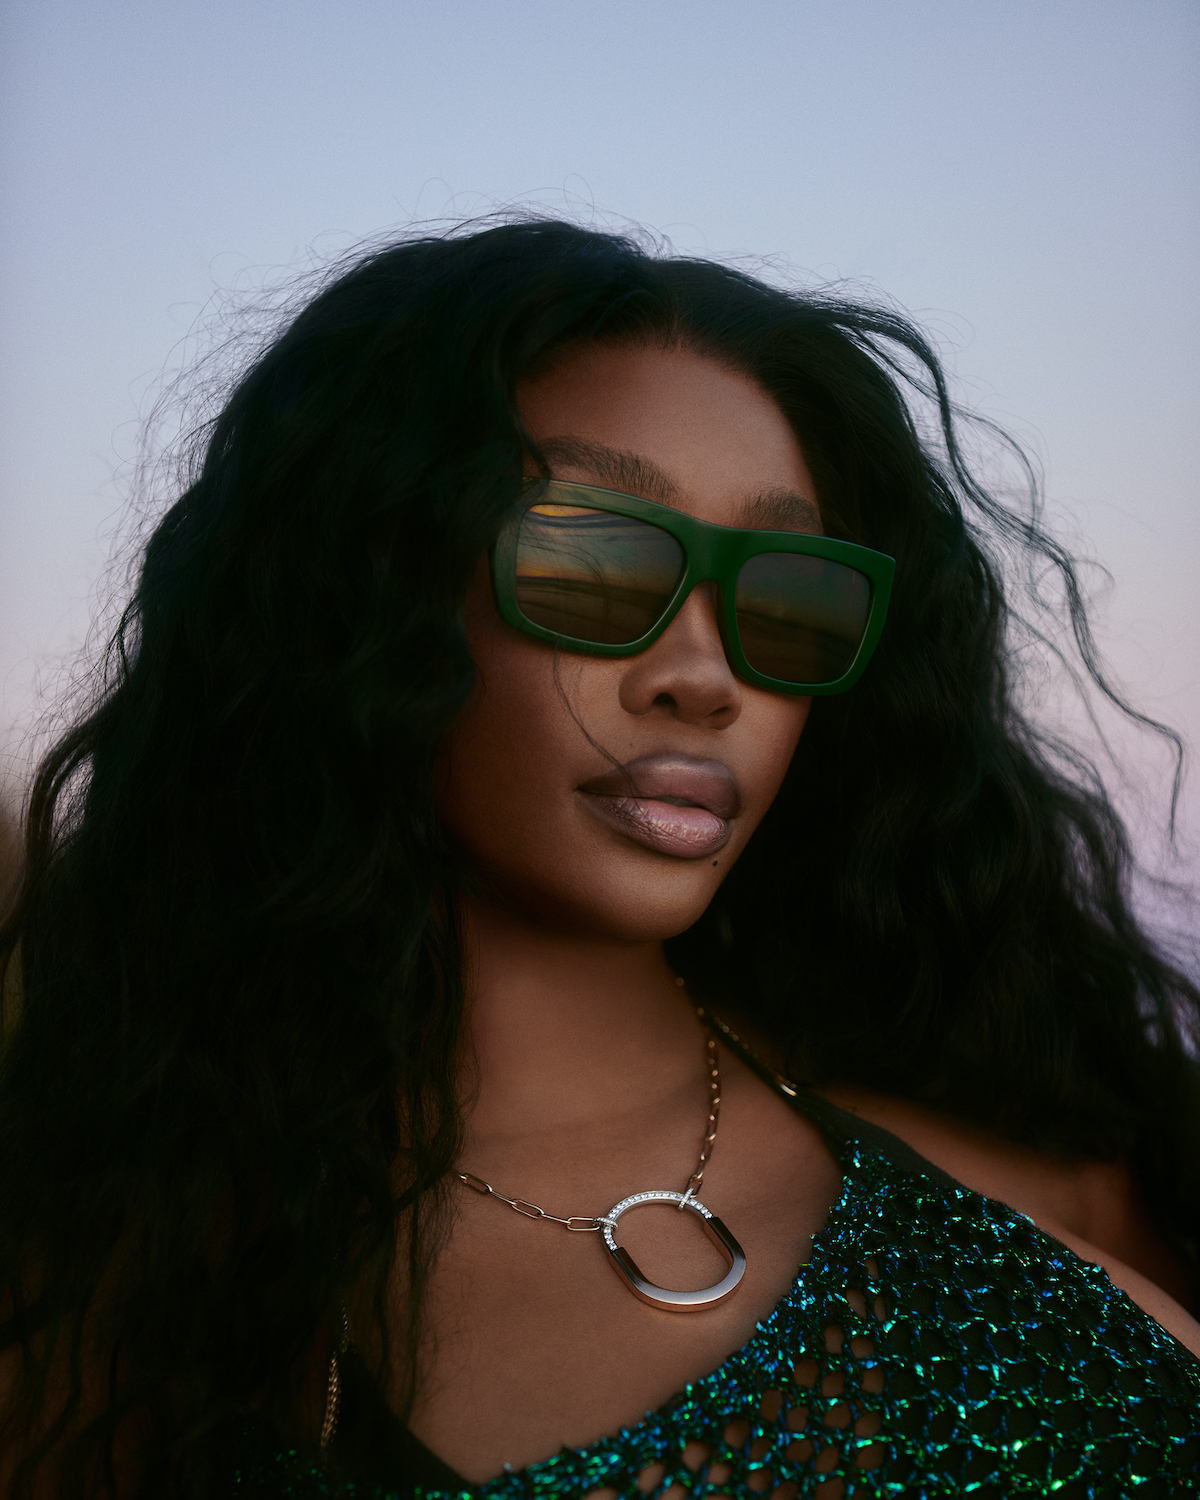 SZA for CR Fashion Book Issue 22